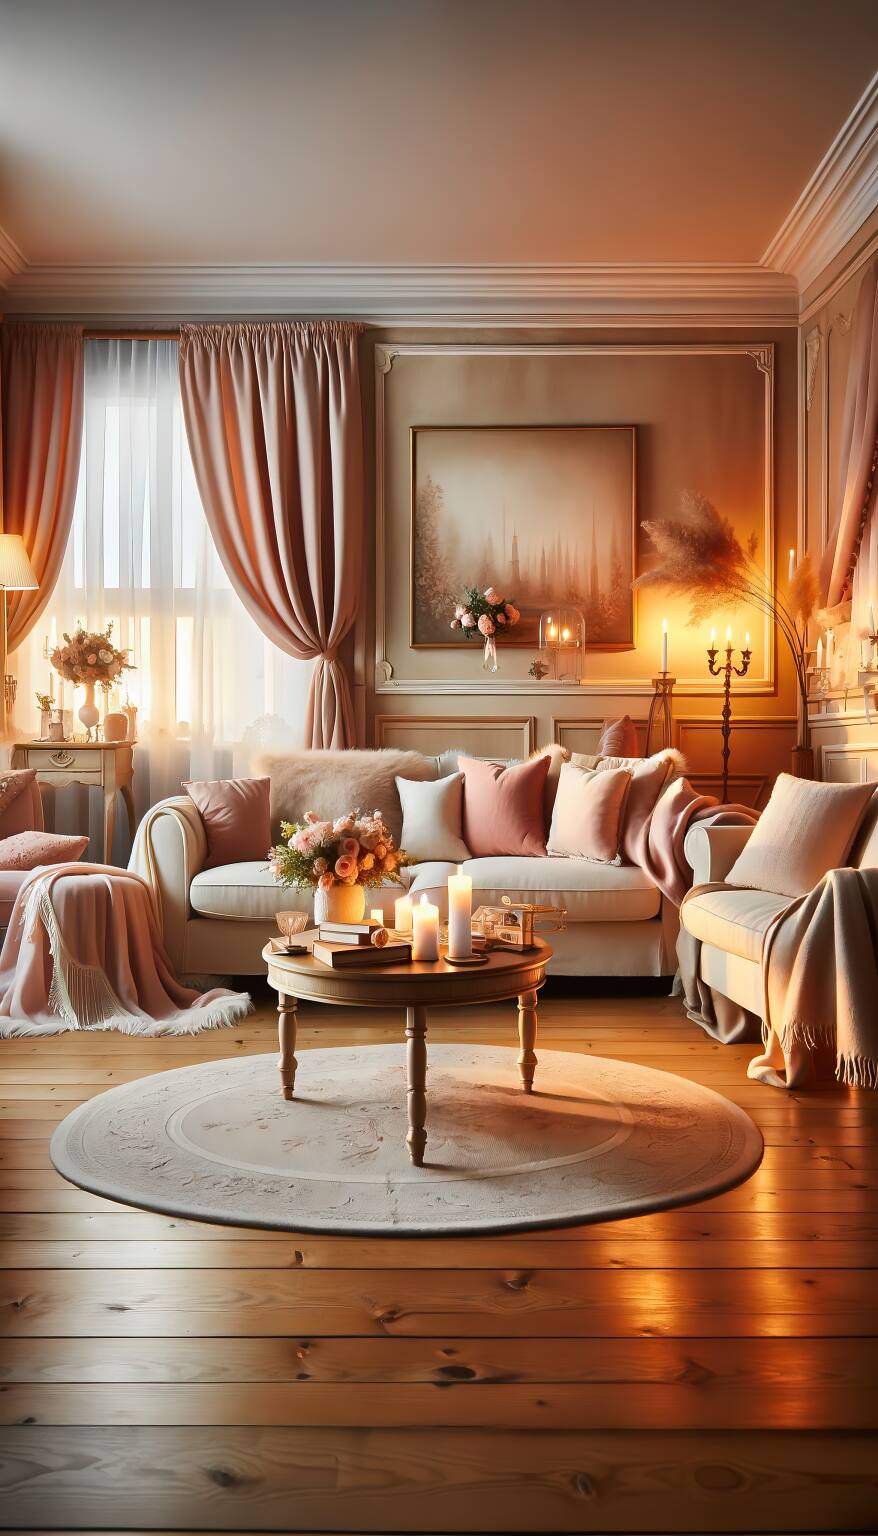 Romantic Style Living Room In Soft Rose And Ivory, Featuring A Velvet Love Seat, Ornate Fireplace, Draped Sheer Curtains, And A Crystal Chandelier.